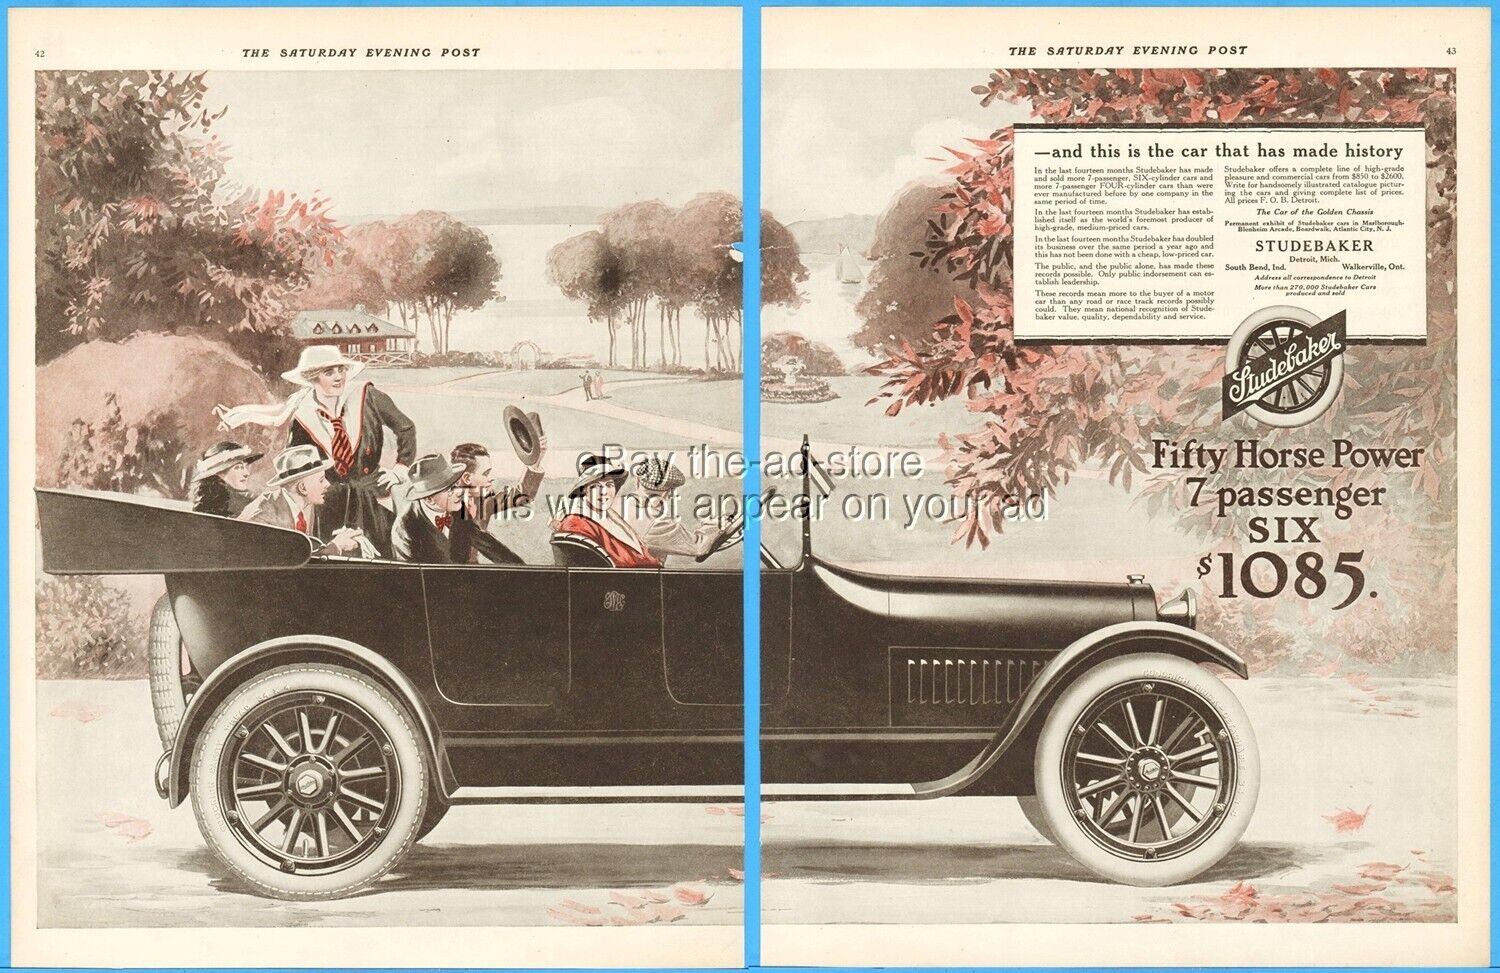 1916 Studebaker South Bend IN 7 Passenger Six Convertible with Goodrich Tires Ad